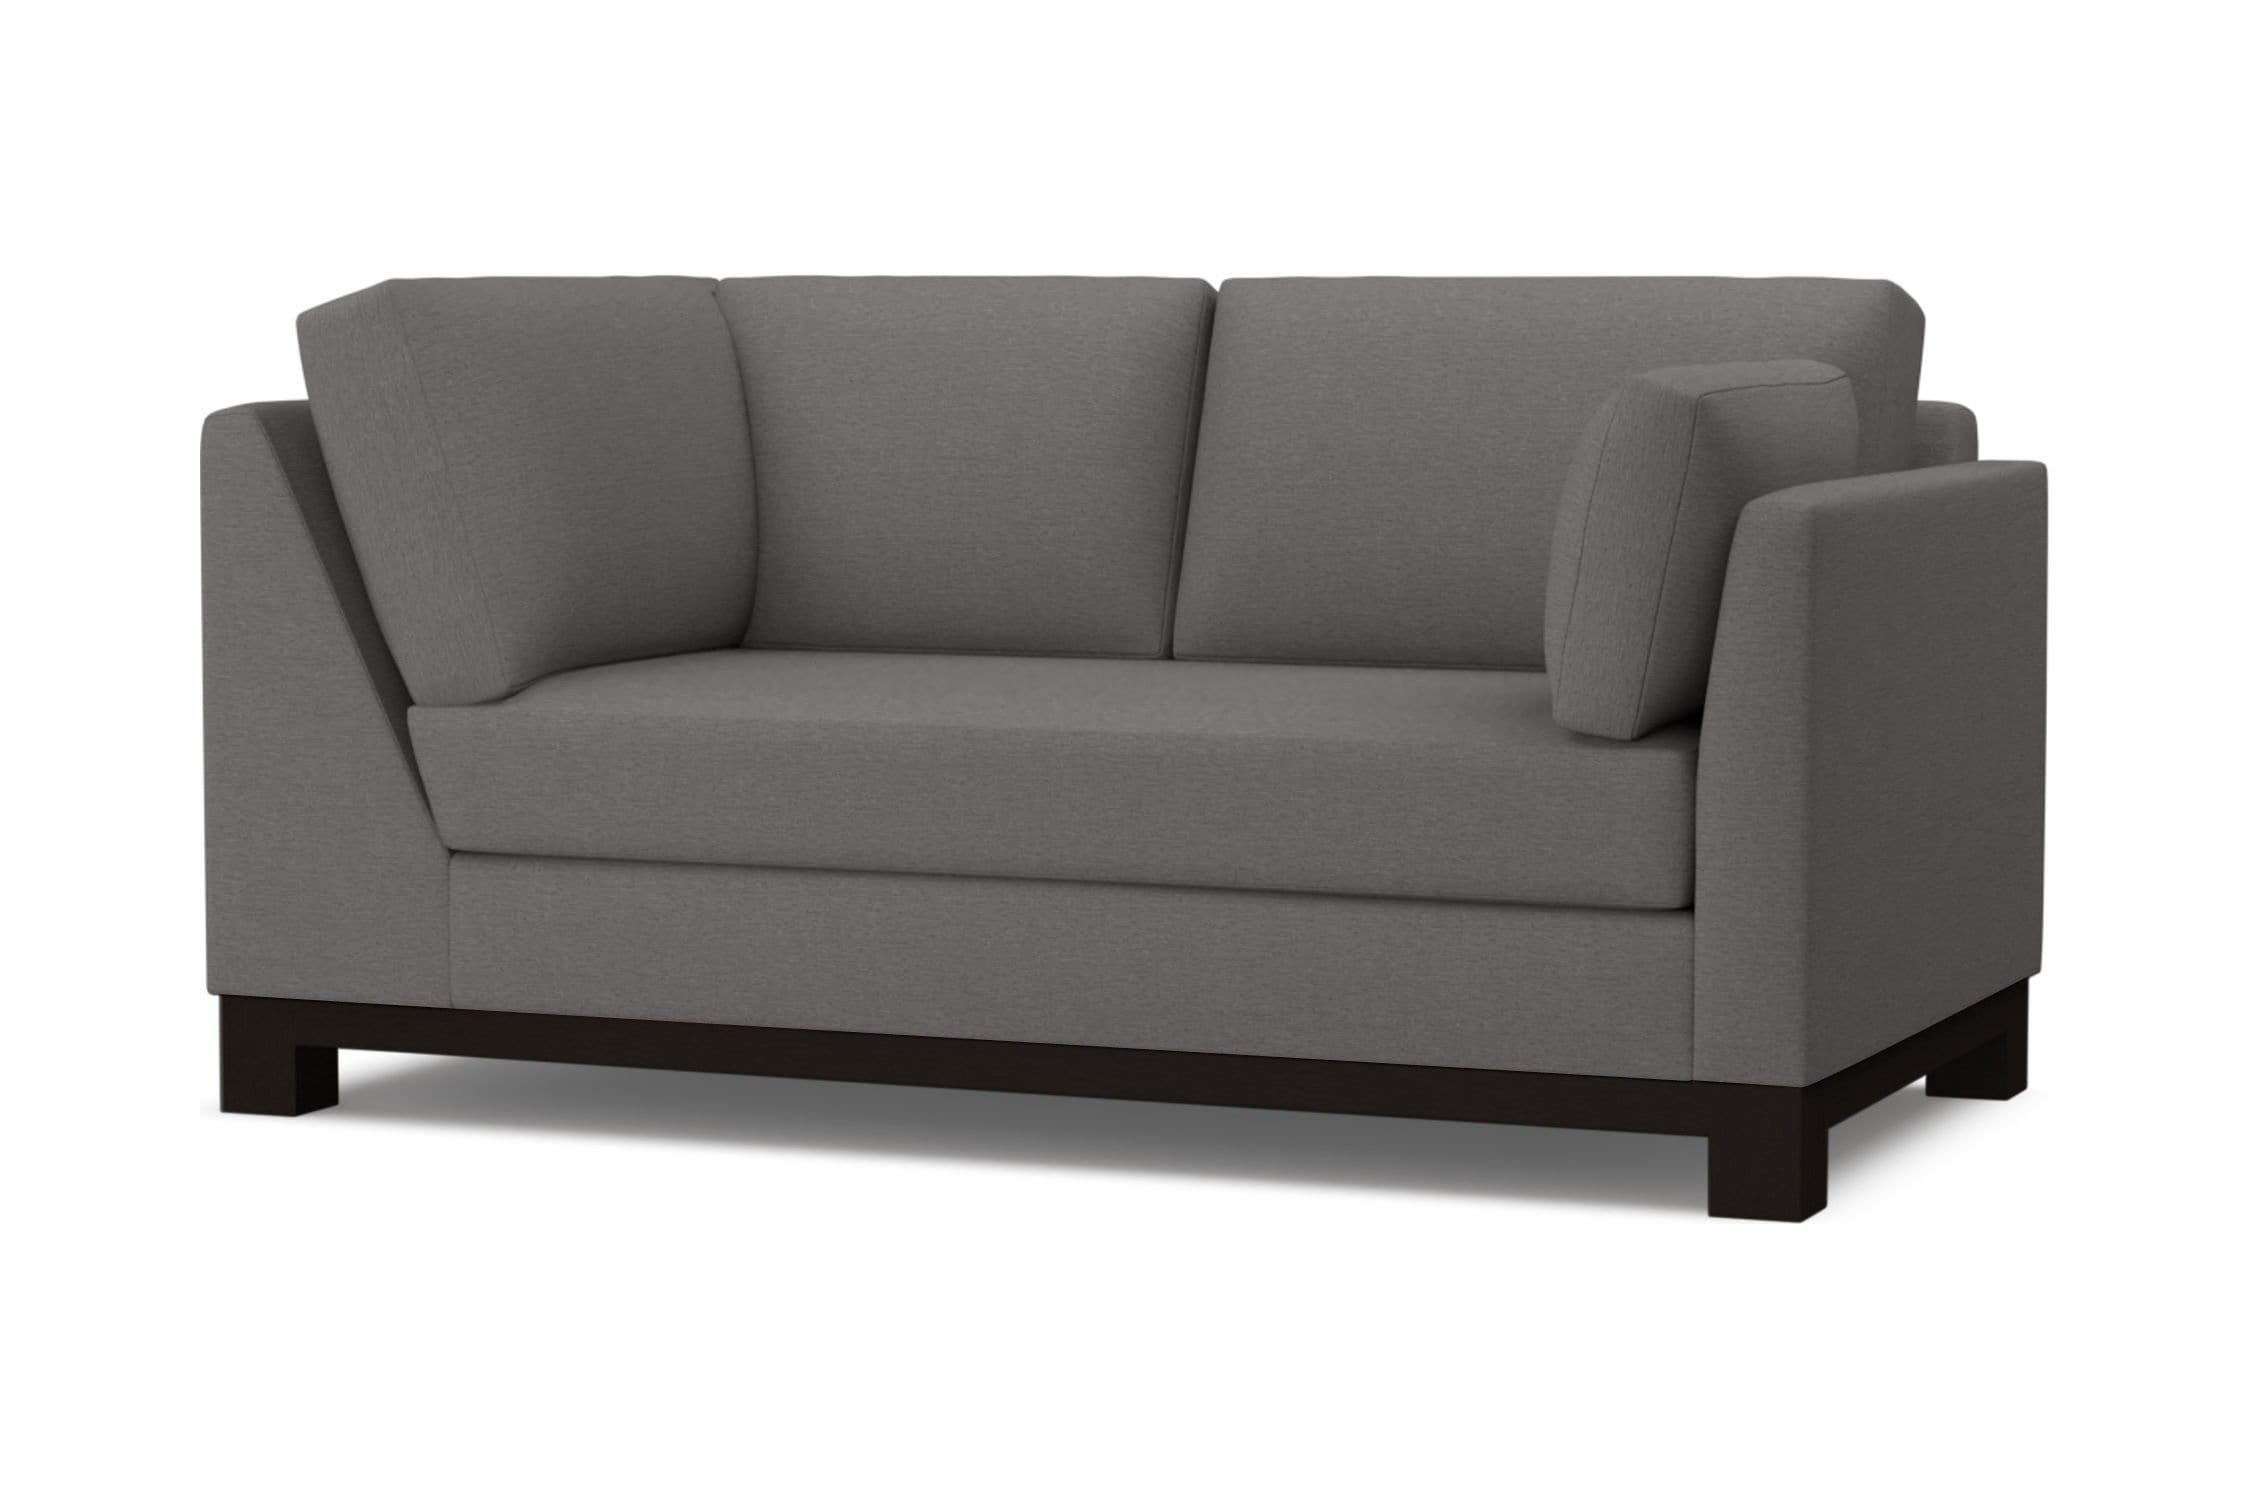 Avalon Right Arm Corner Apt Size Sofa - Grey -  Modular Collection - Build Your Own Sectional